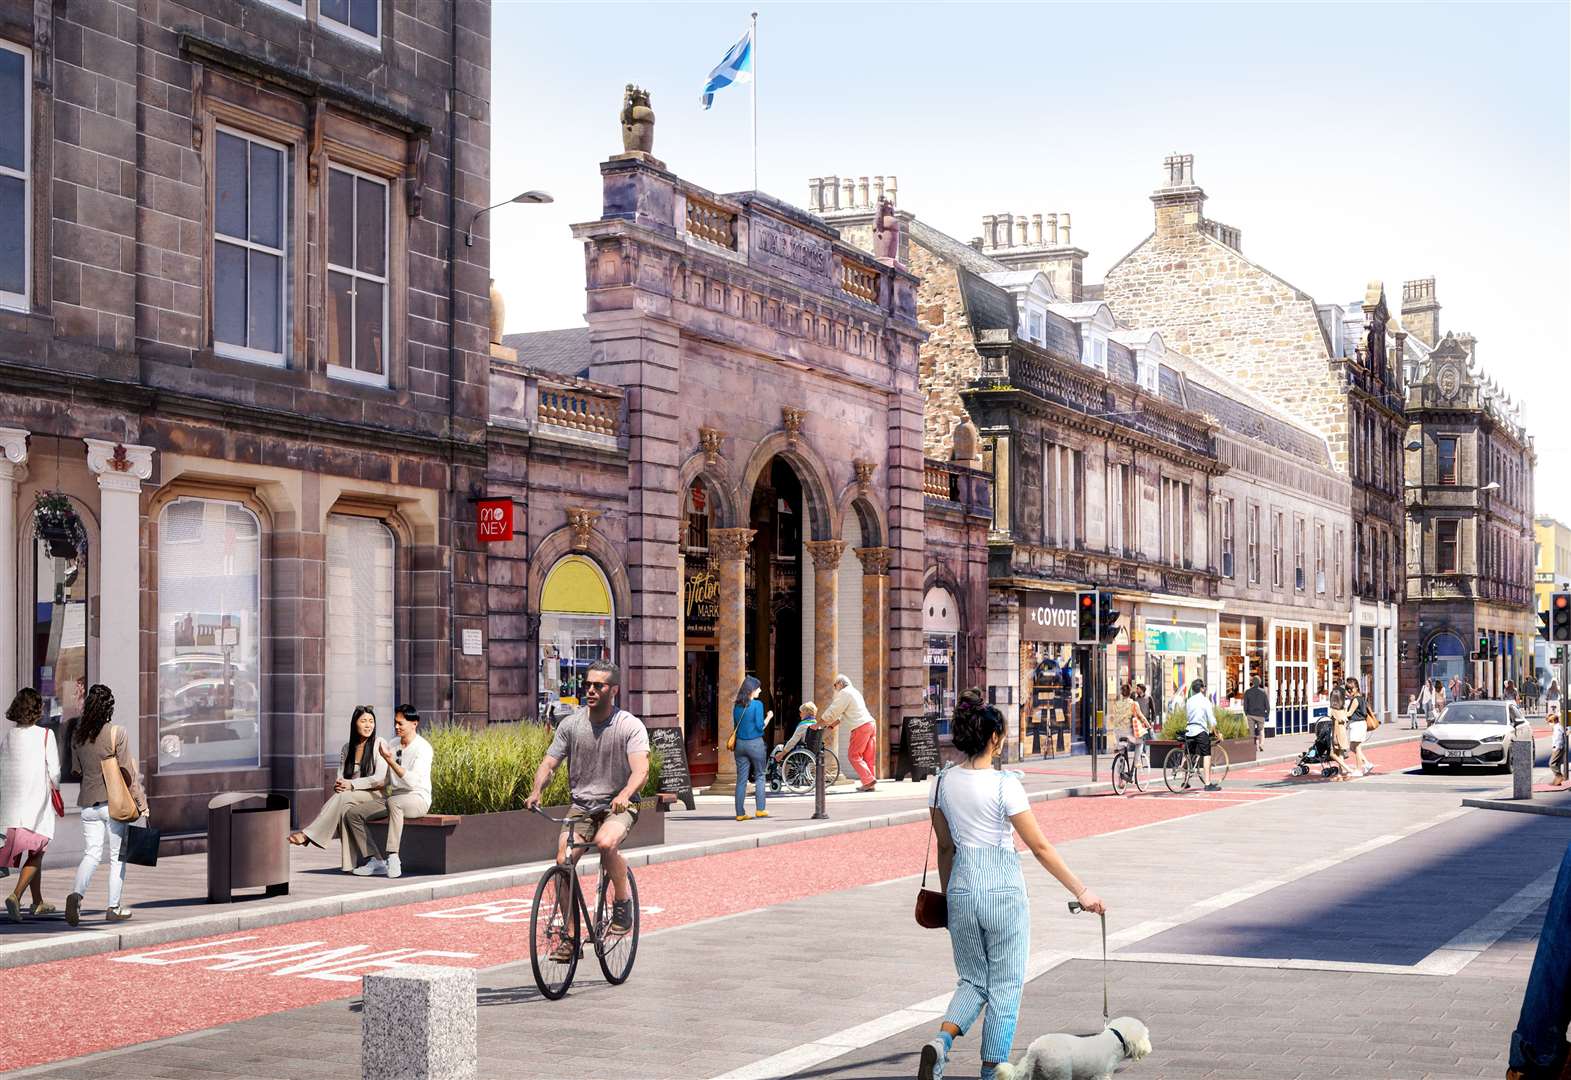 The council hopes the latest proposals for Academy Street would simply put most drivers off using the area as a through road to cut across the city centre.